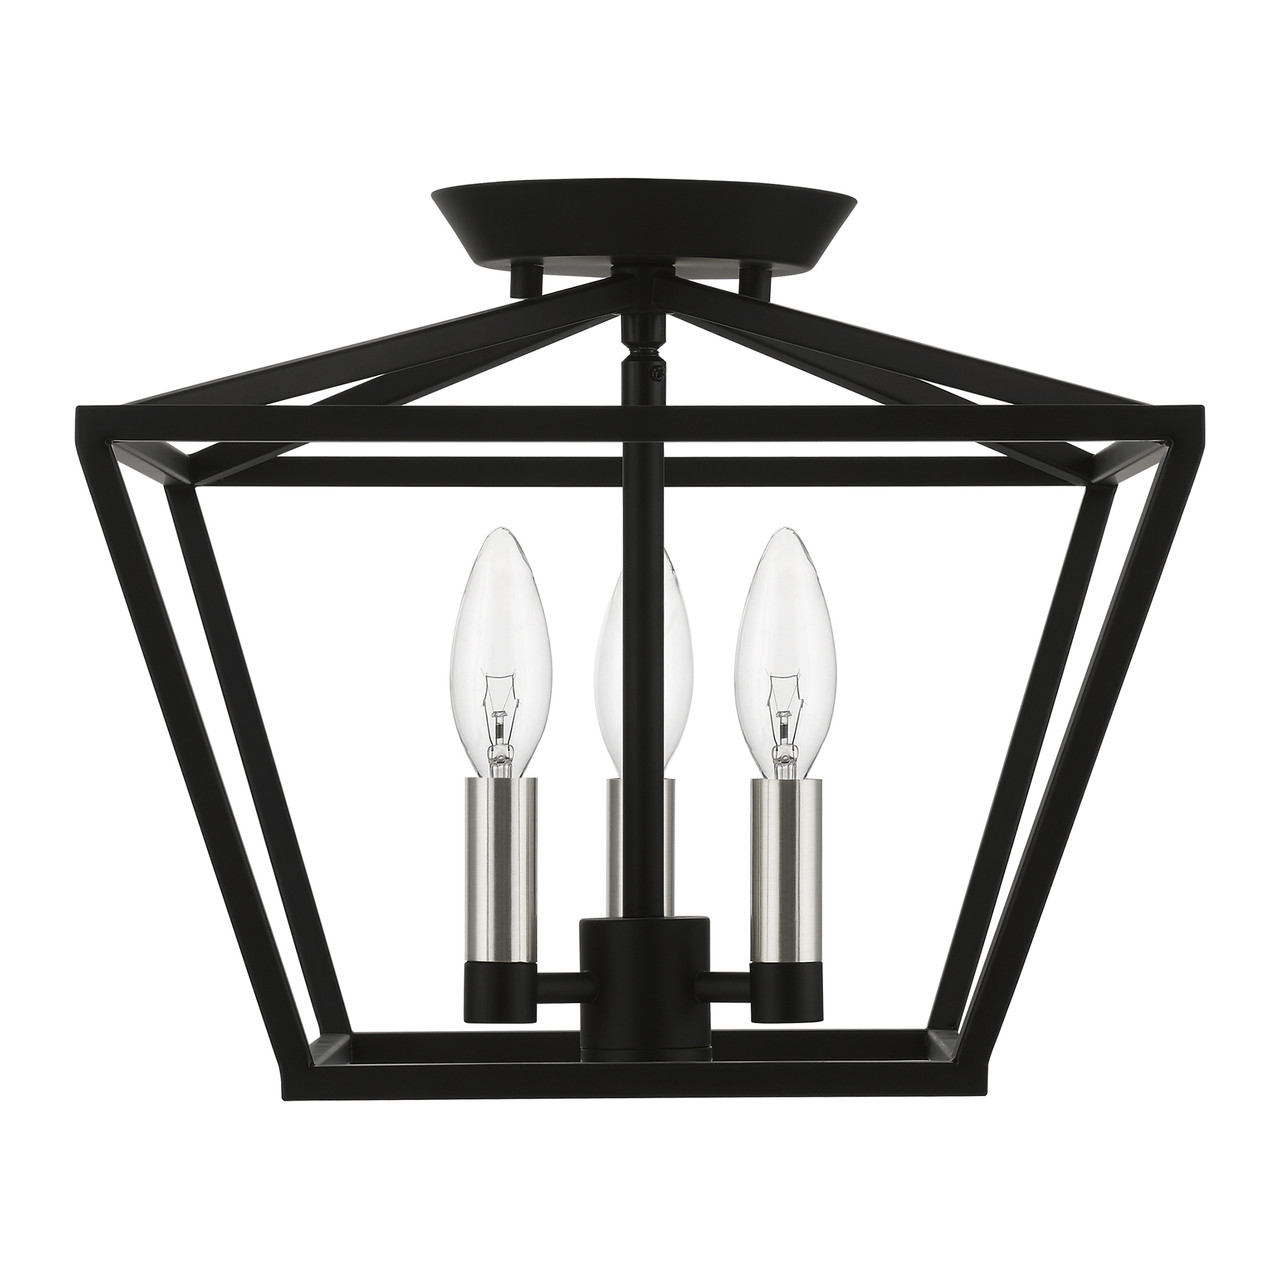 LIVEX LIGHTING 49430-04 3 Light Black with Brushed Nickel Accents Square Semi-Flush